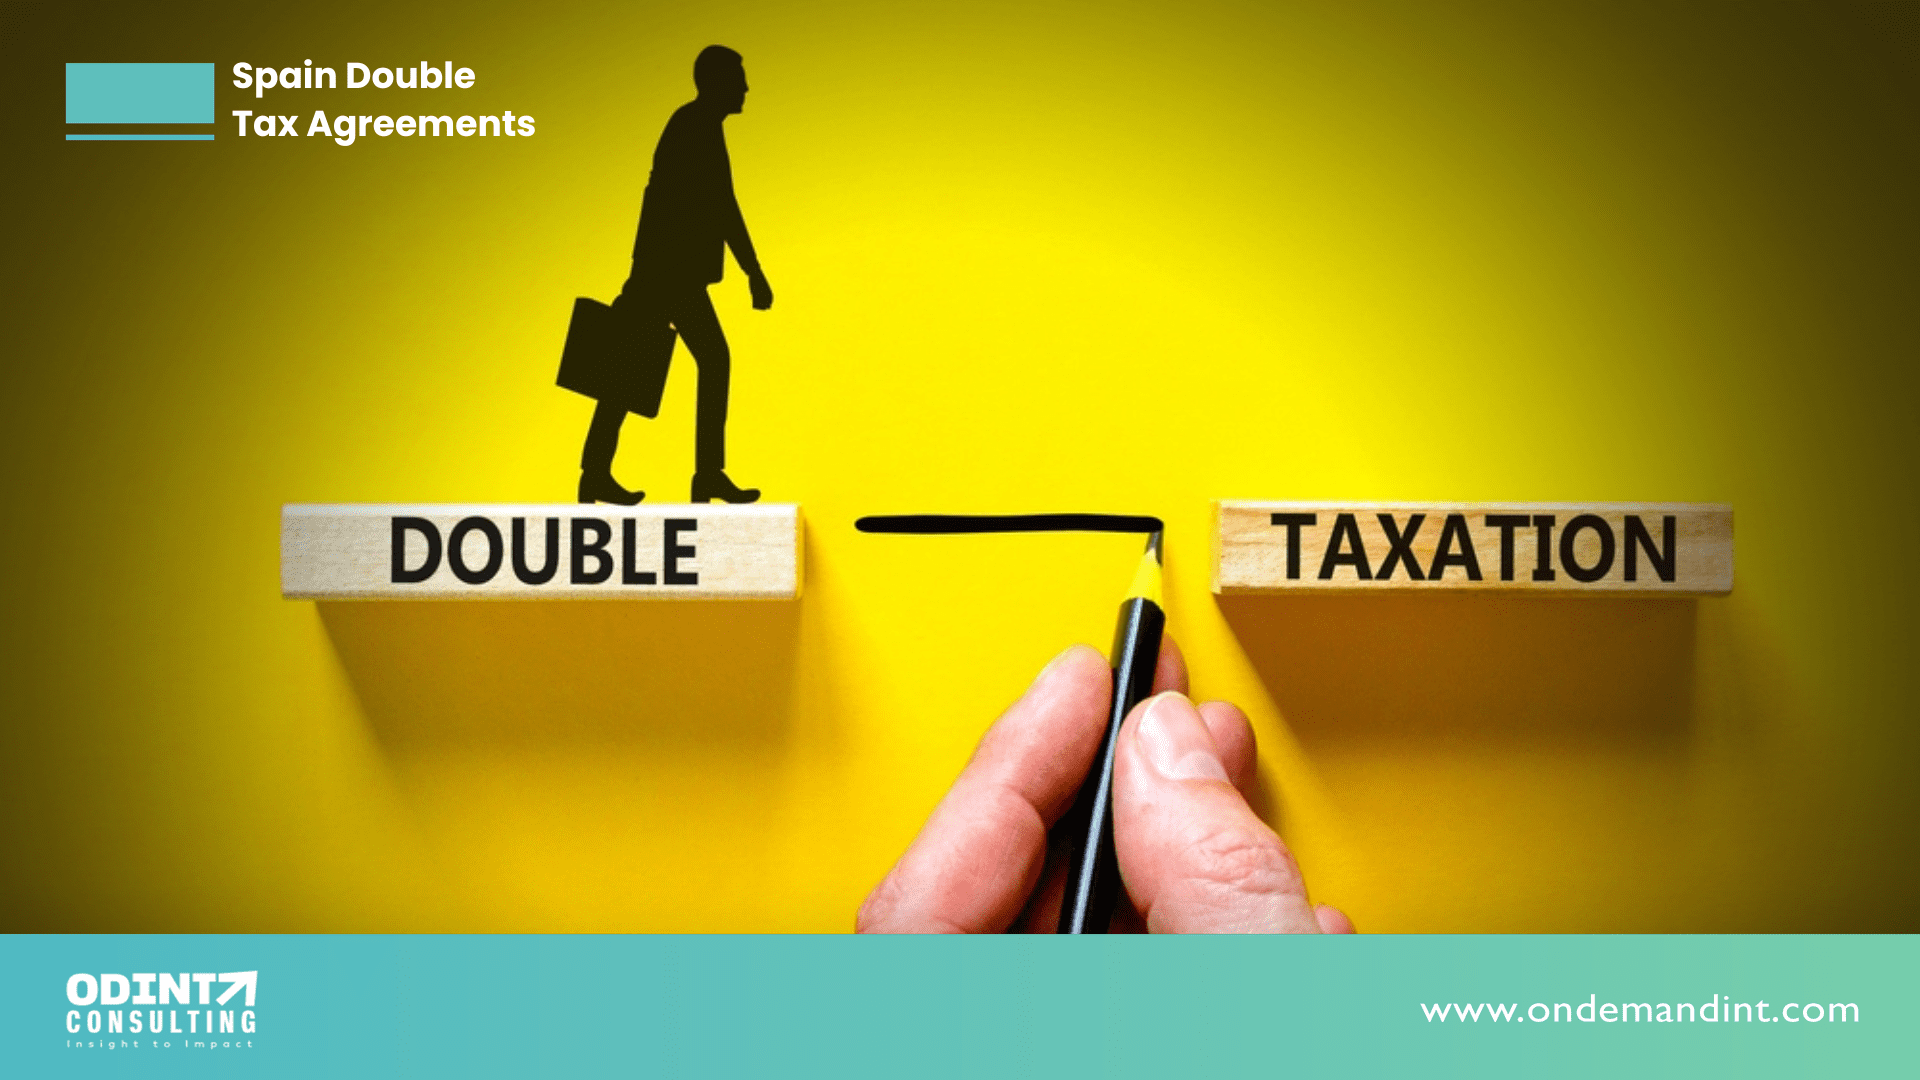 Spain Double Tax Agreements: Importance, Advantages & How They Work